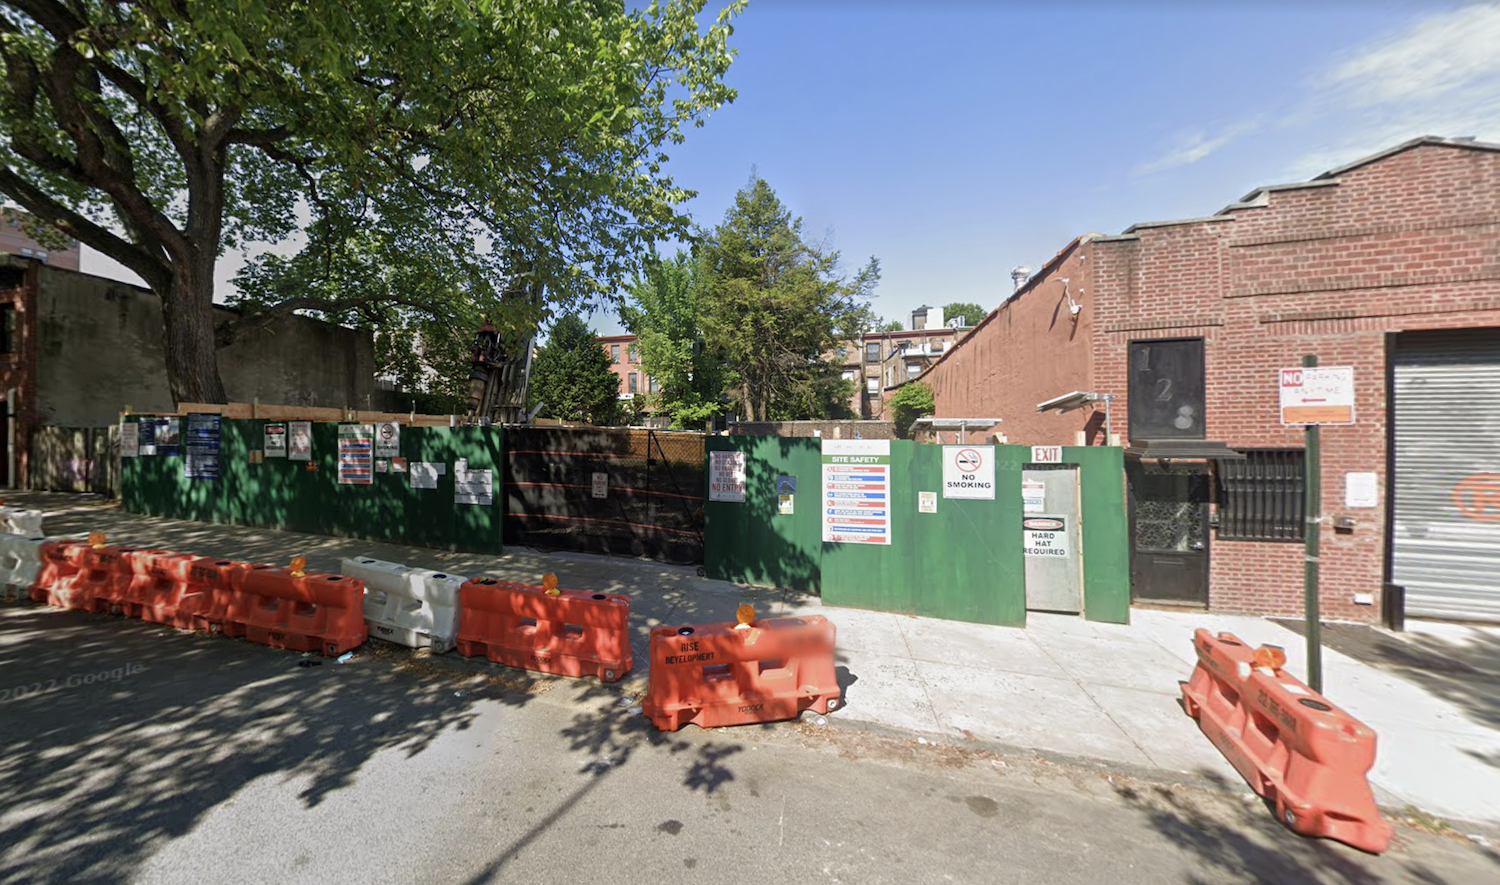   
																Permits Filed for 132 Waverly Avenue in Clinton Hill, Brooklyn 
															 